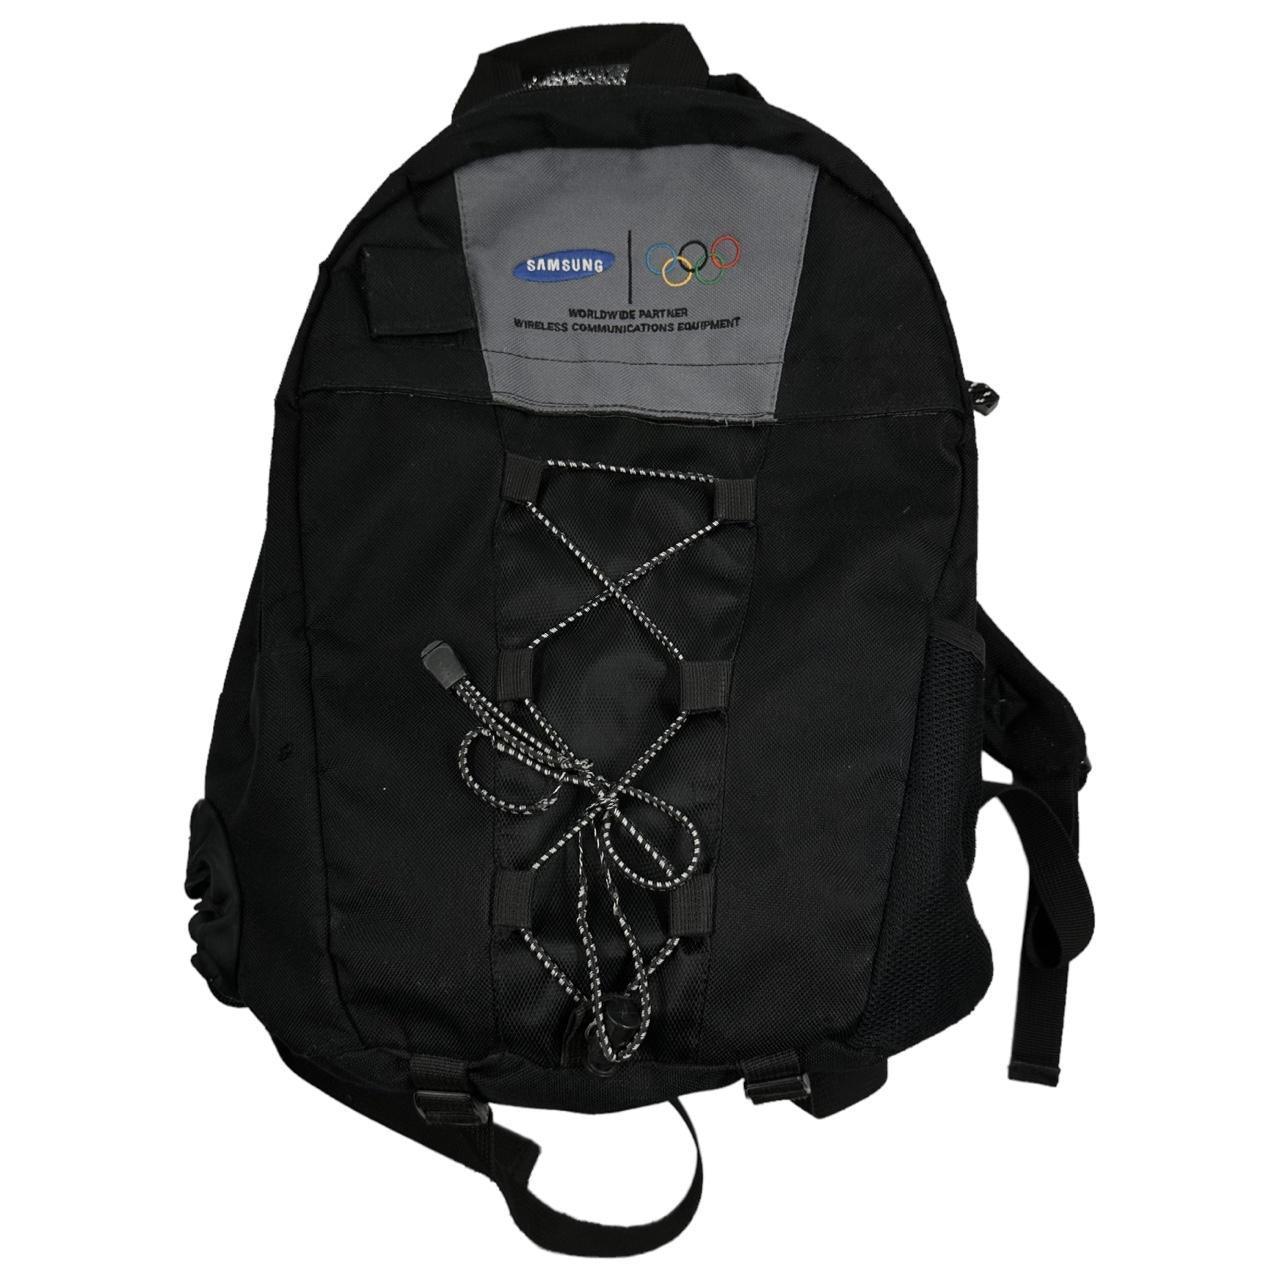 Vintage Samsung Olympics Backpack - Known Source